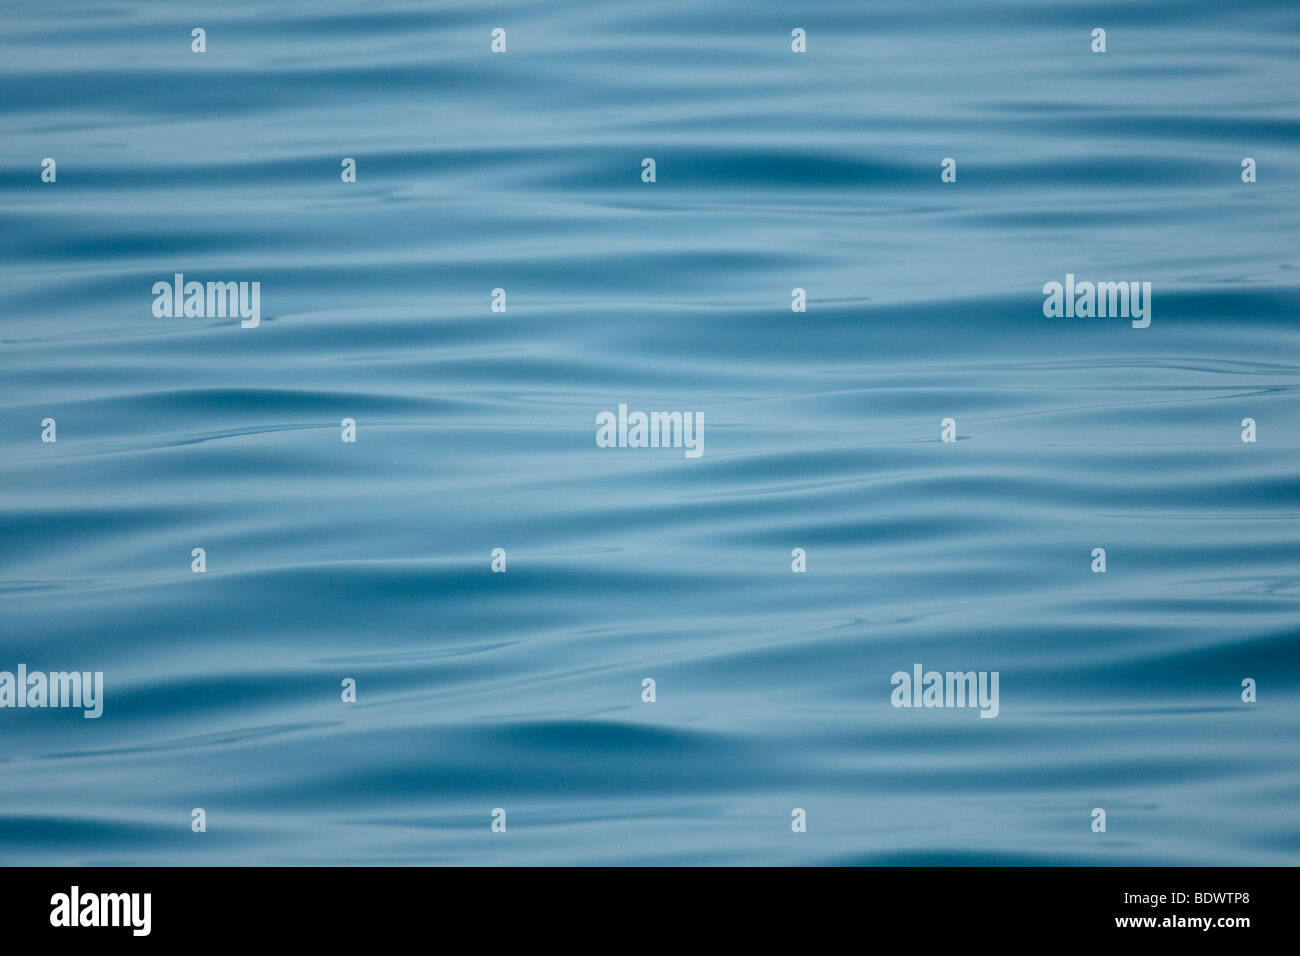 Patterns in rippled sea surface on a calm day. Stock Photo